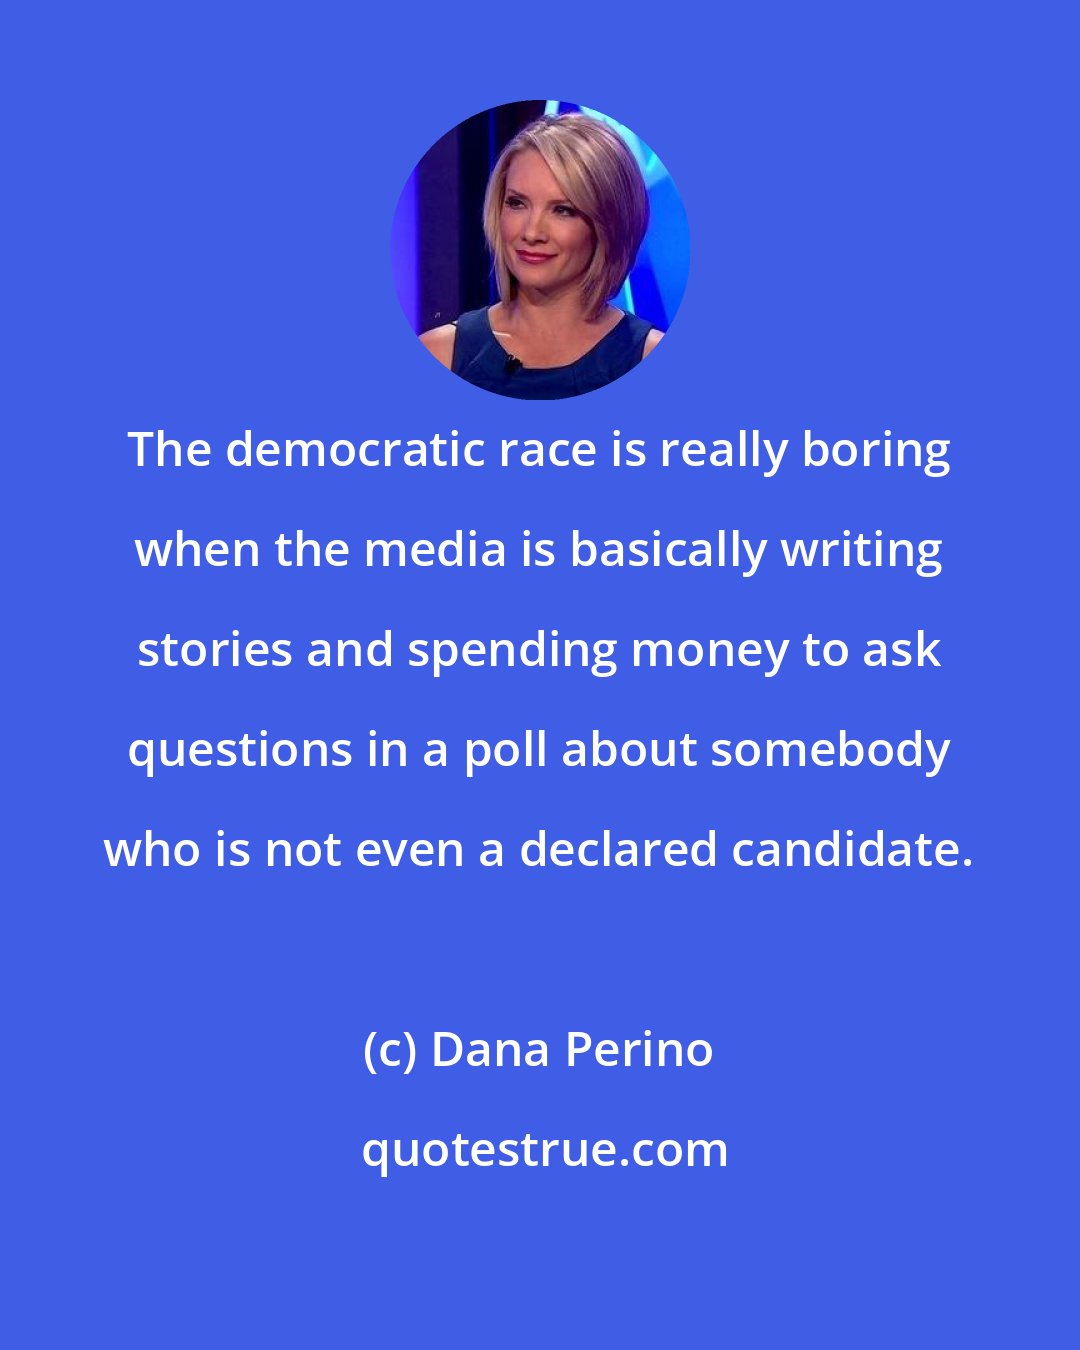 Dana Perino: The democratic race is really boring when the media is basically writing stories and spending money to ask questions in a poll about somebody who is not even a declared candidate.